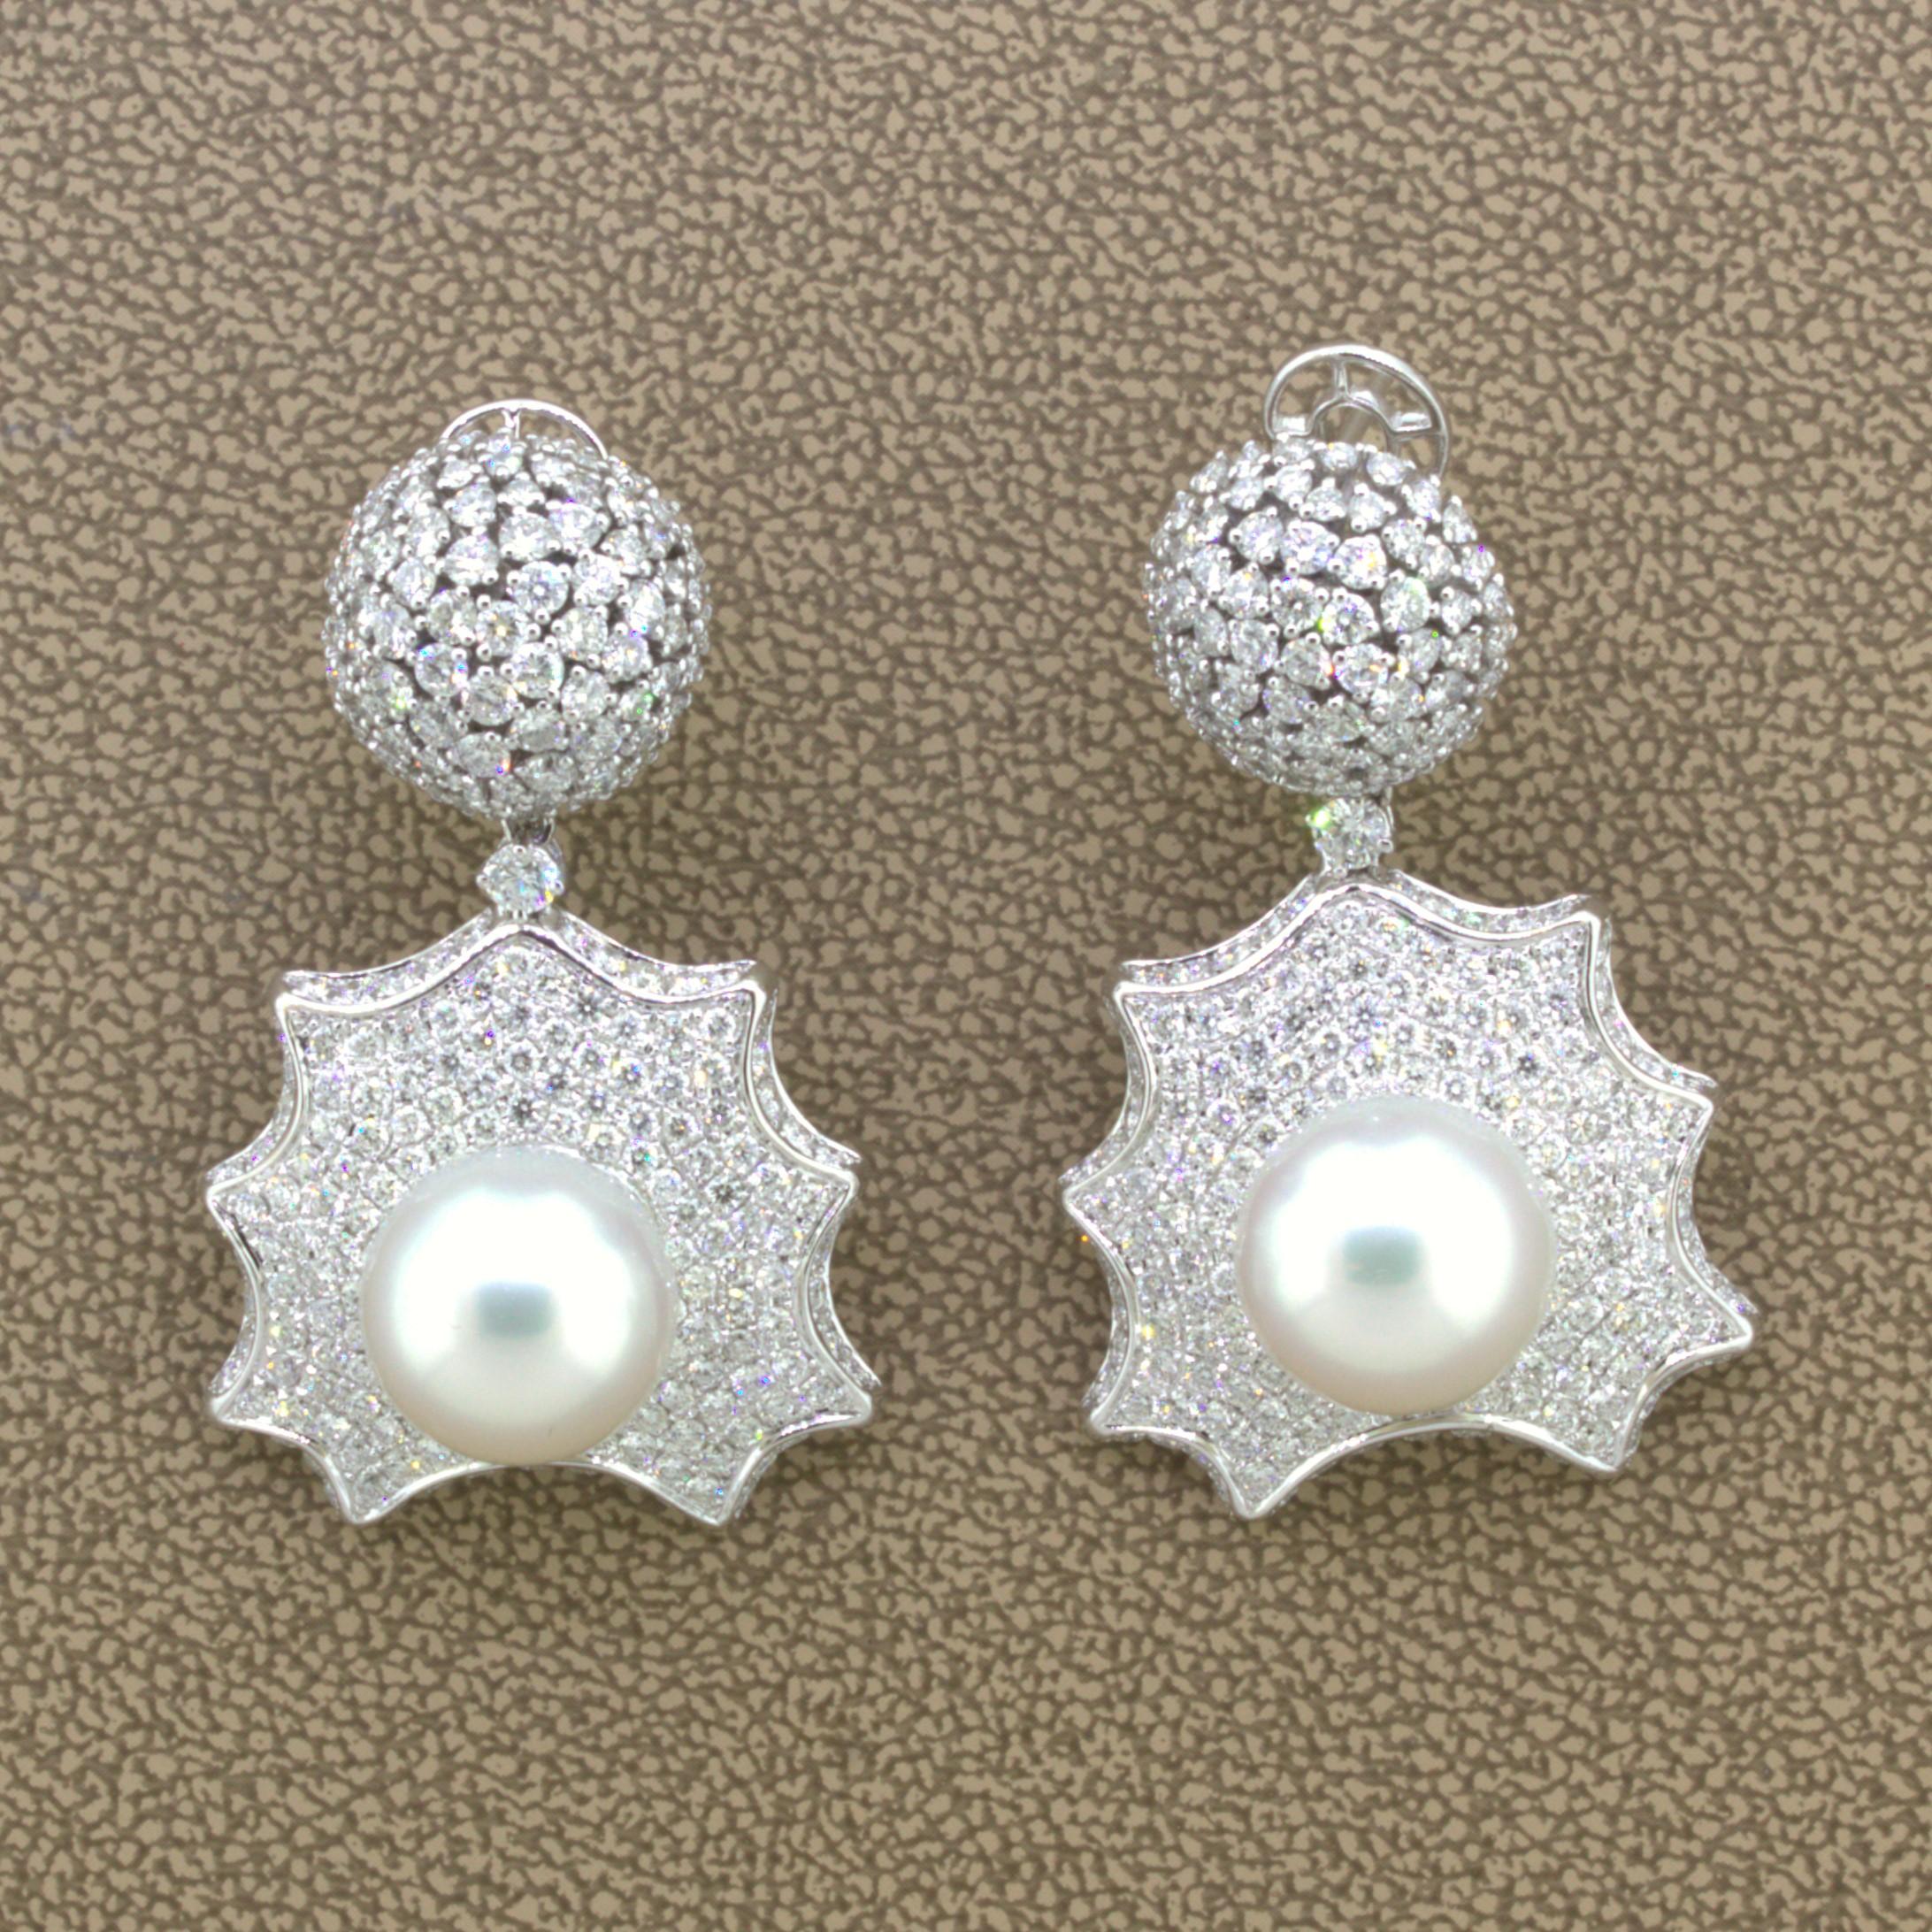 A unique, fun, and stylish pair of fine earrings featuring South Sea pearls and diamonds. The pearls measure 11.5 meters each and have excellent luster, nacre, and color as they are both matching and glowing in the light. They are complemented by